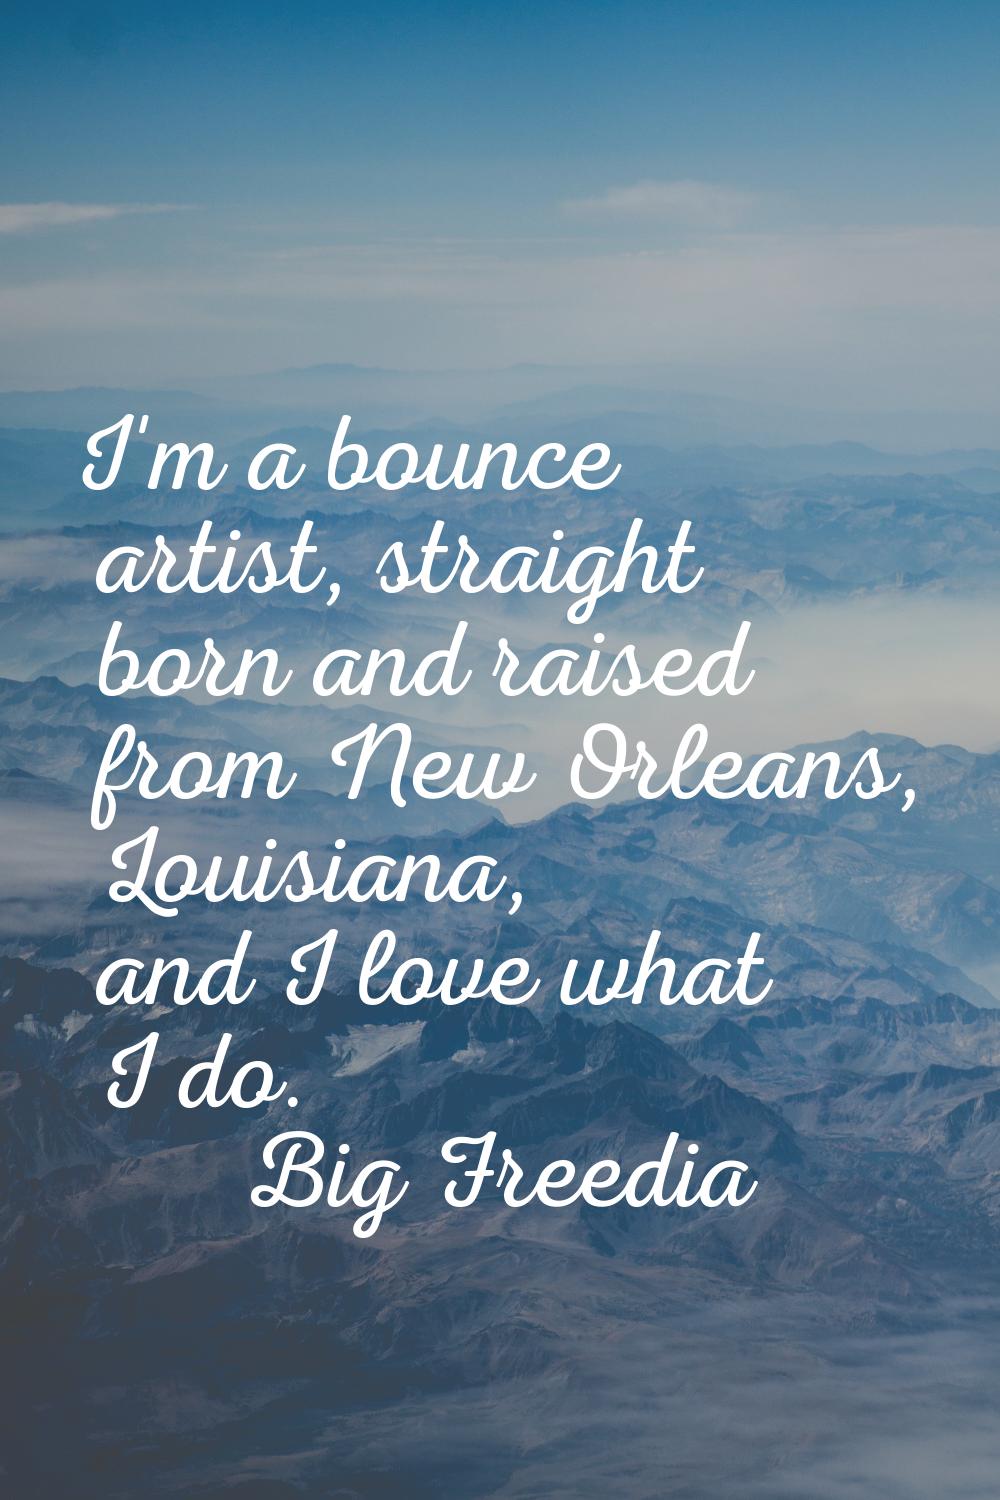 I'm a bounce artist, straight born and raised from New Orleans, Louisiana, and I love what I do.